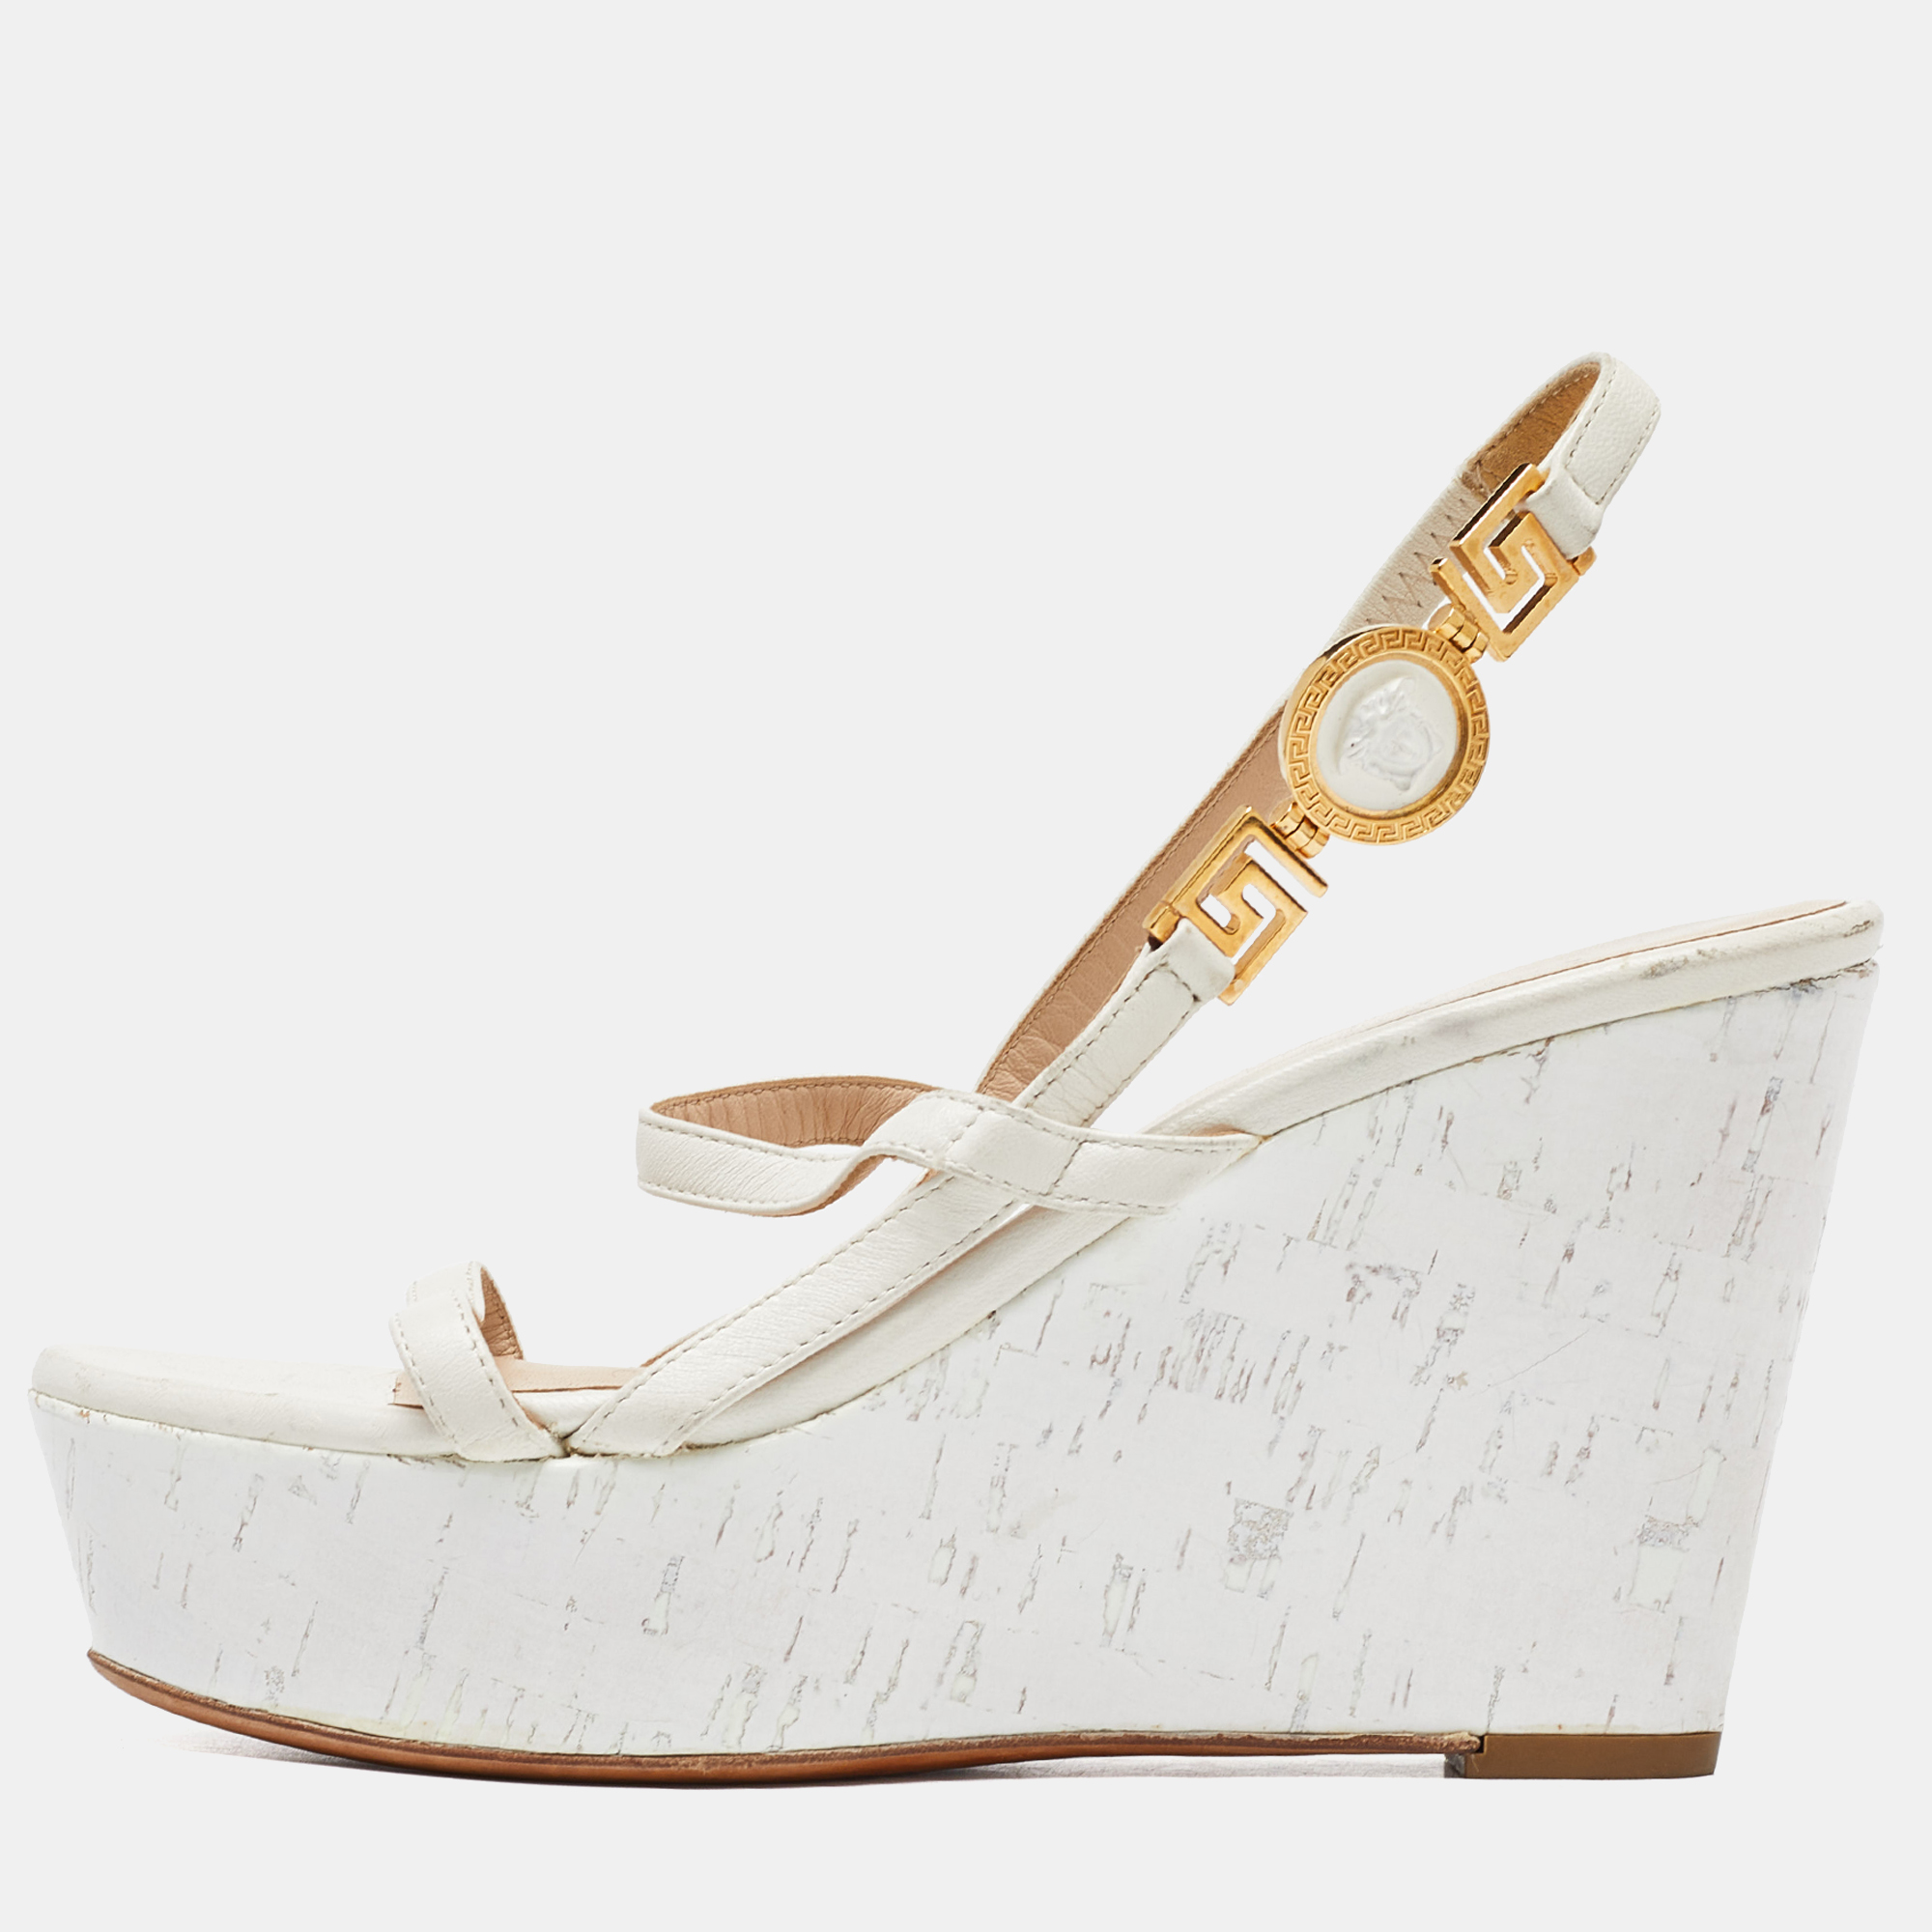 Versace white leather wedge sandals size 36